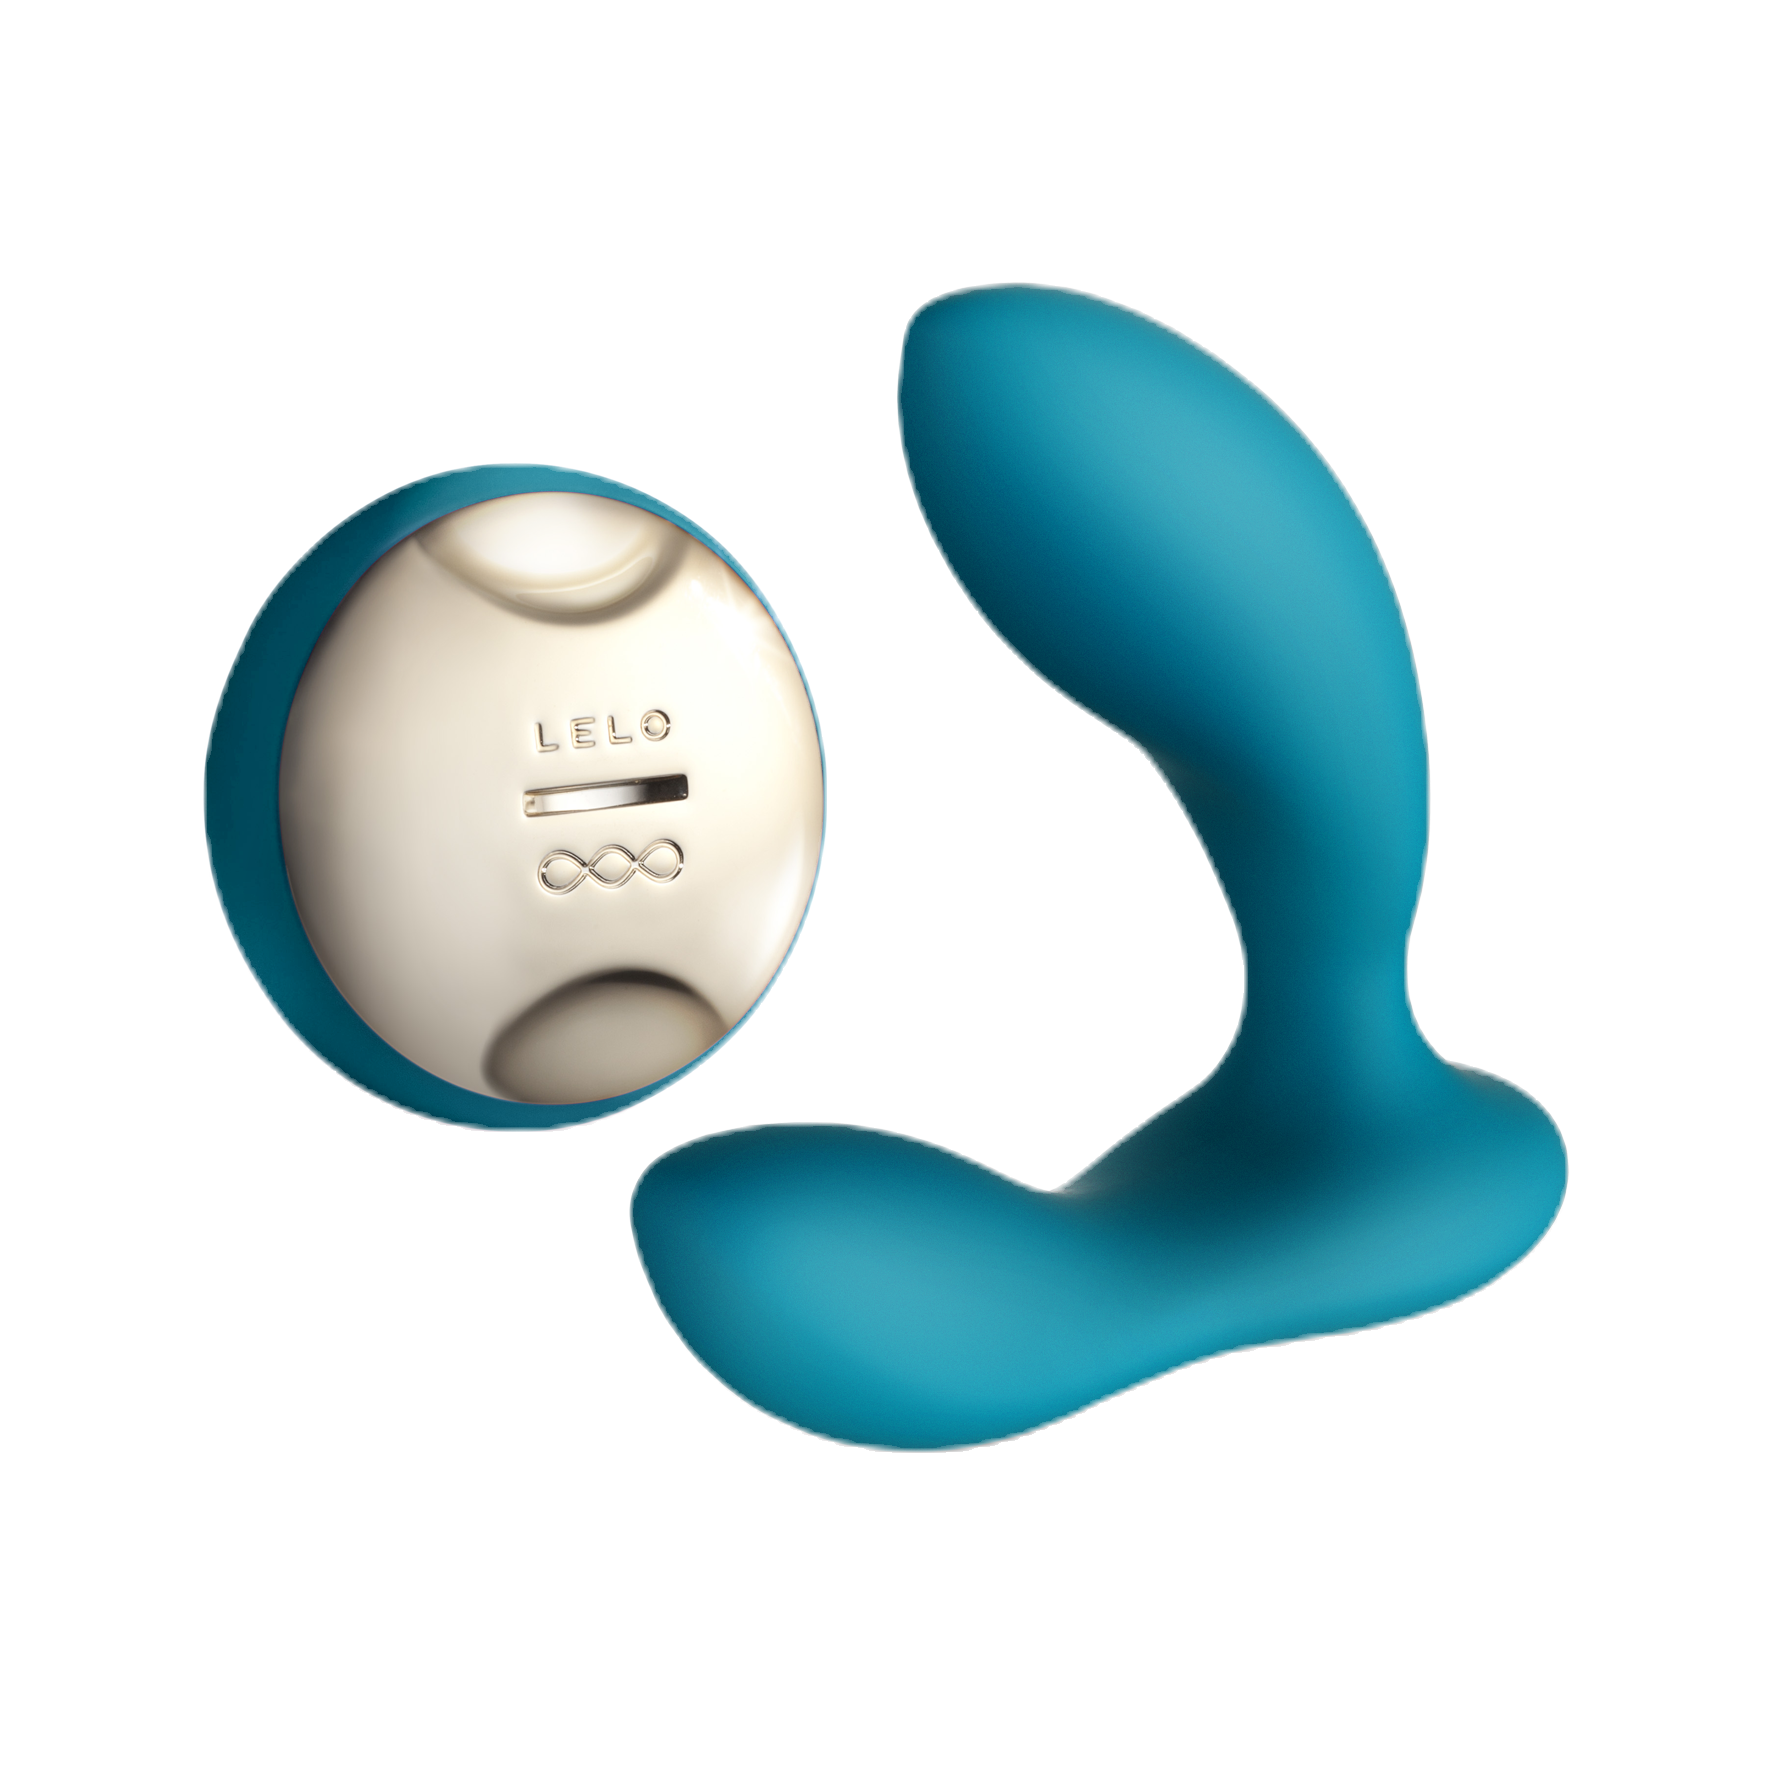 The Hugo prostate massager from LELO makes deep penetration positions even more intense.